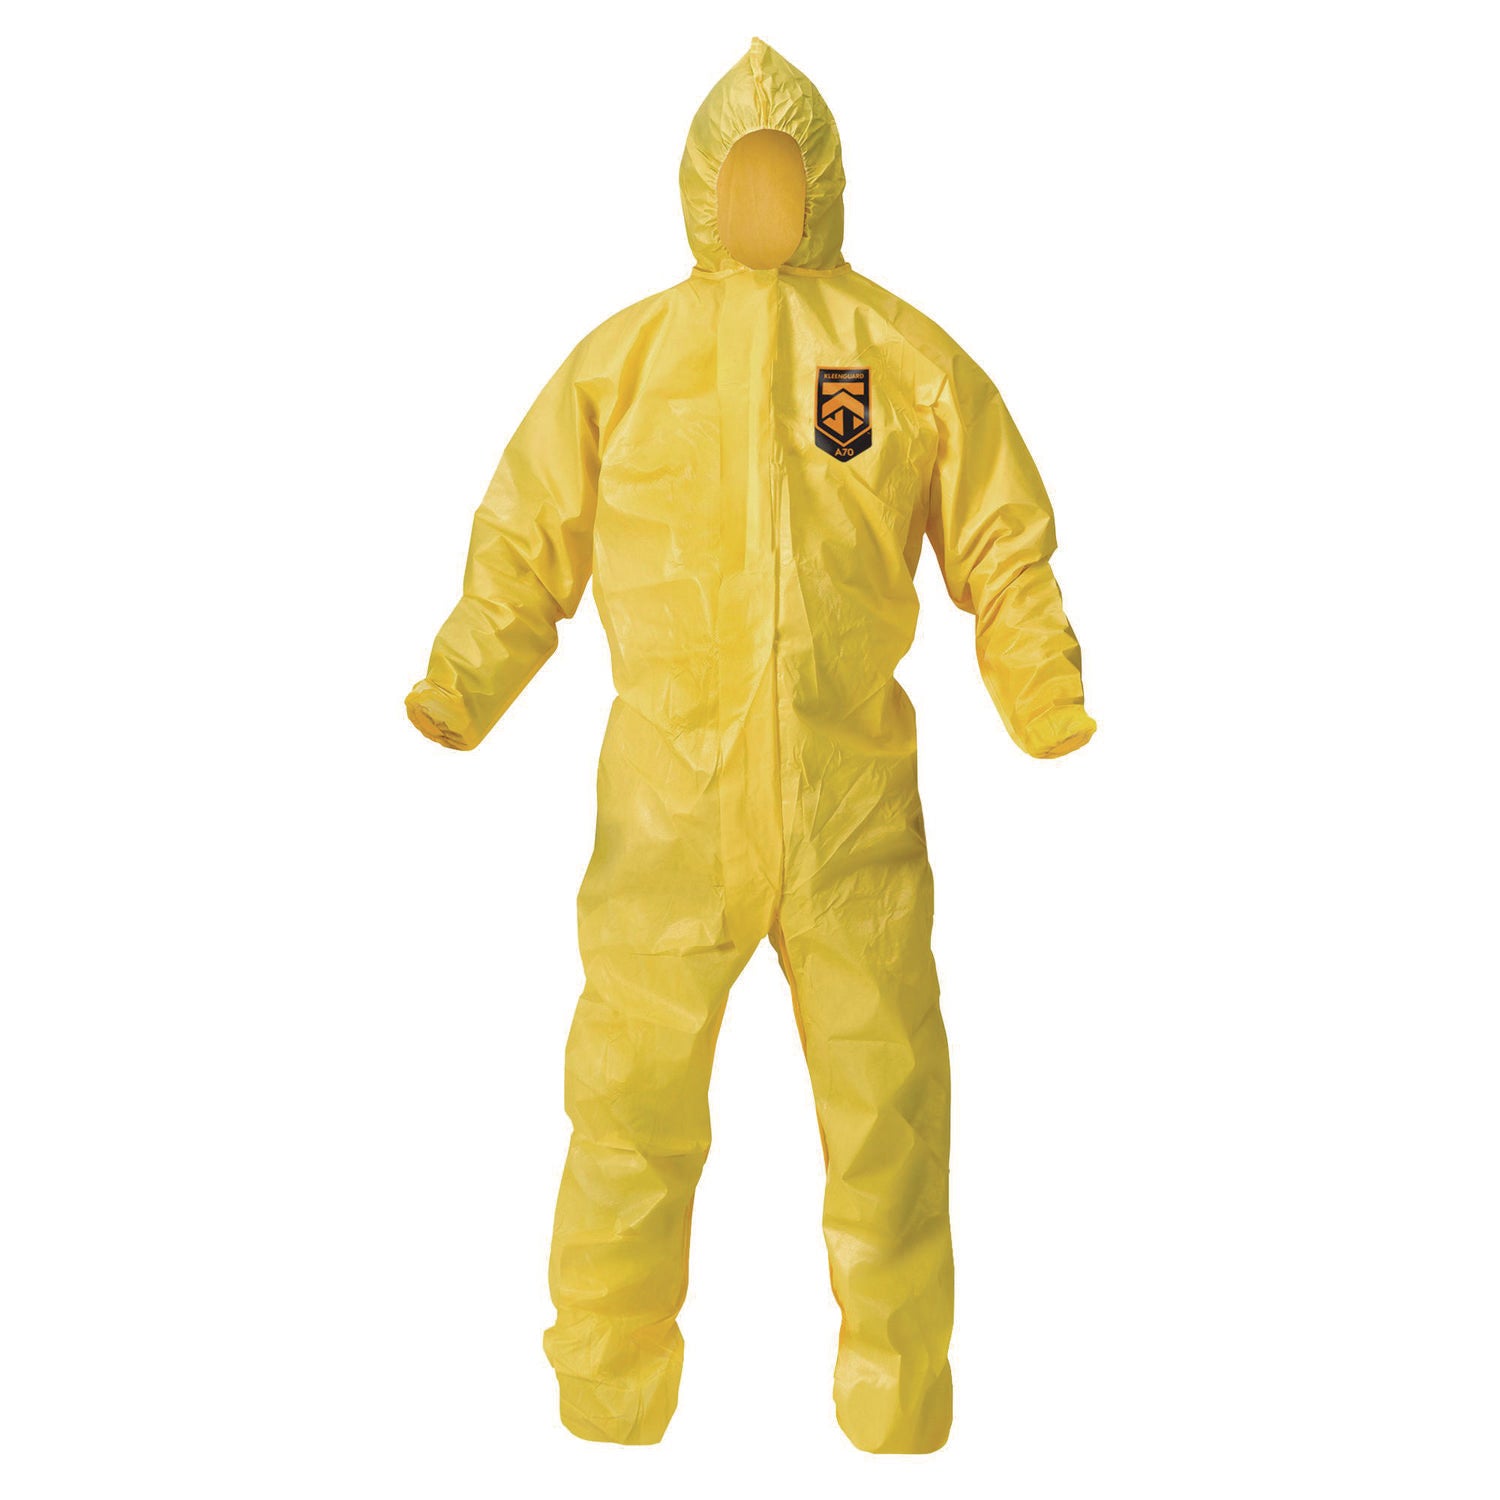 Klngd A70 3X Large Hoodcoverall 12/Case